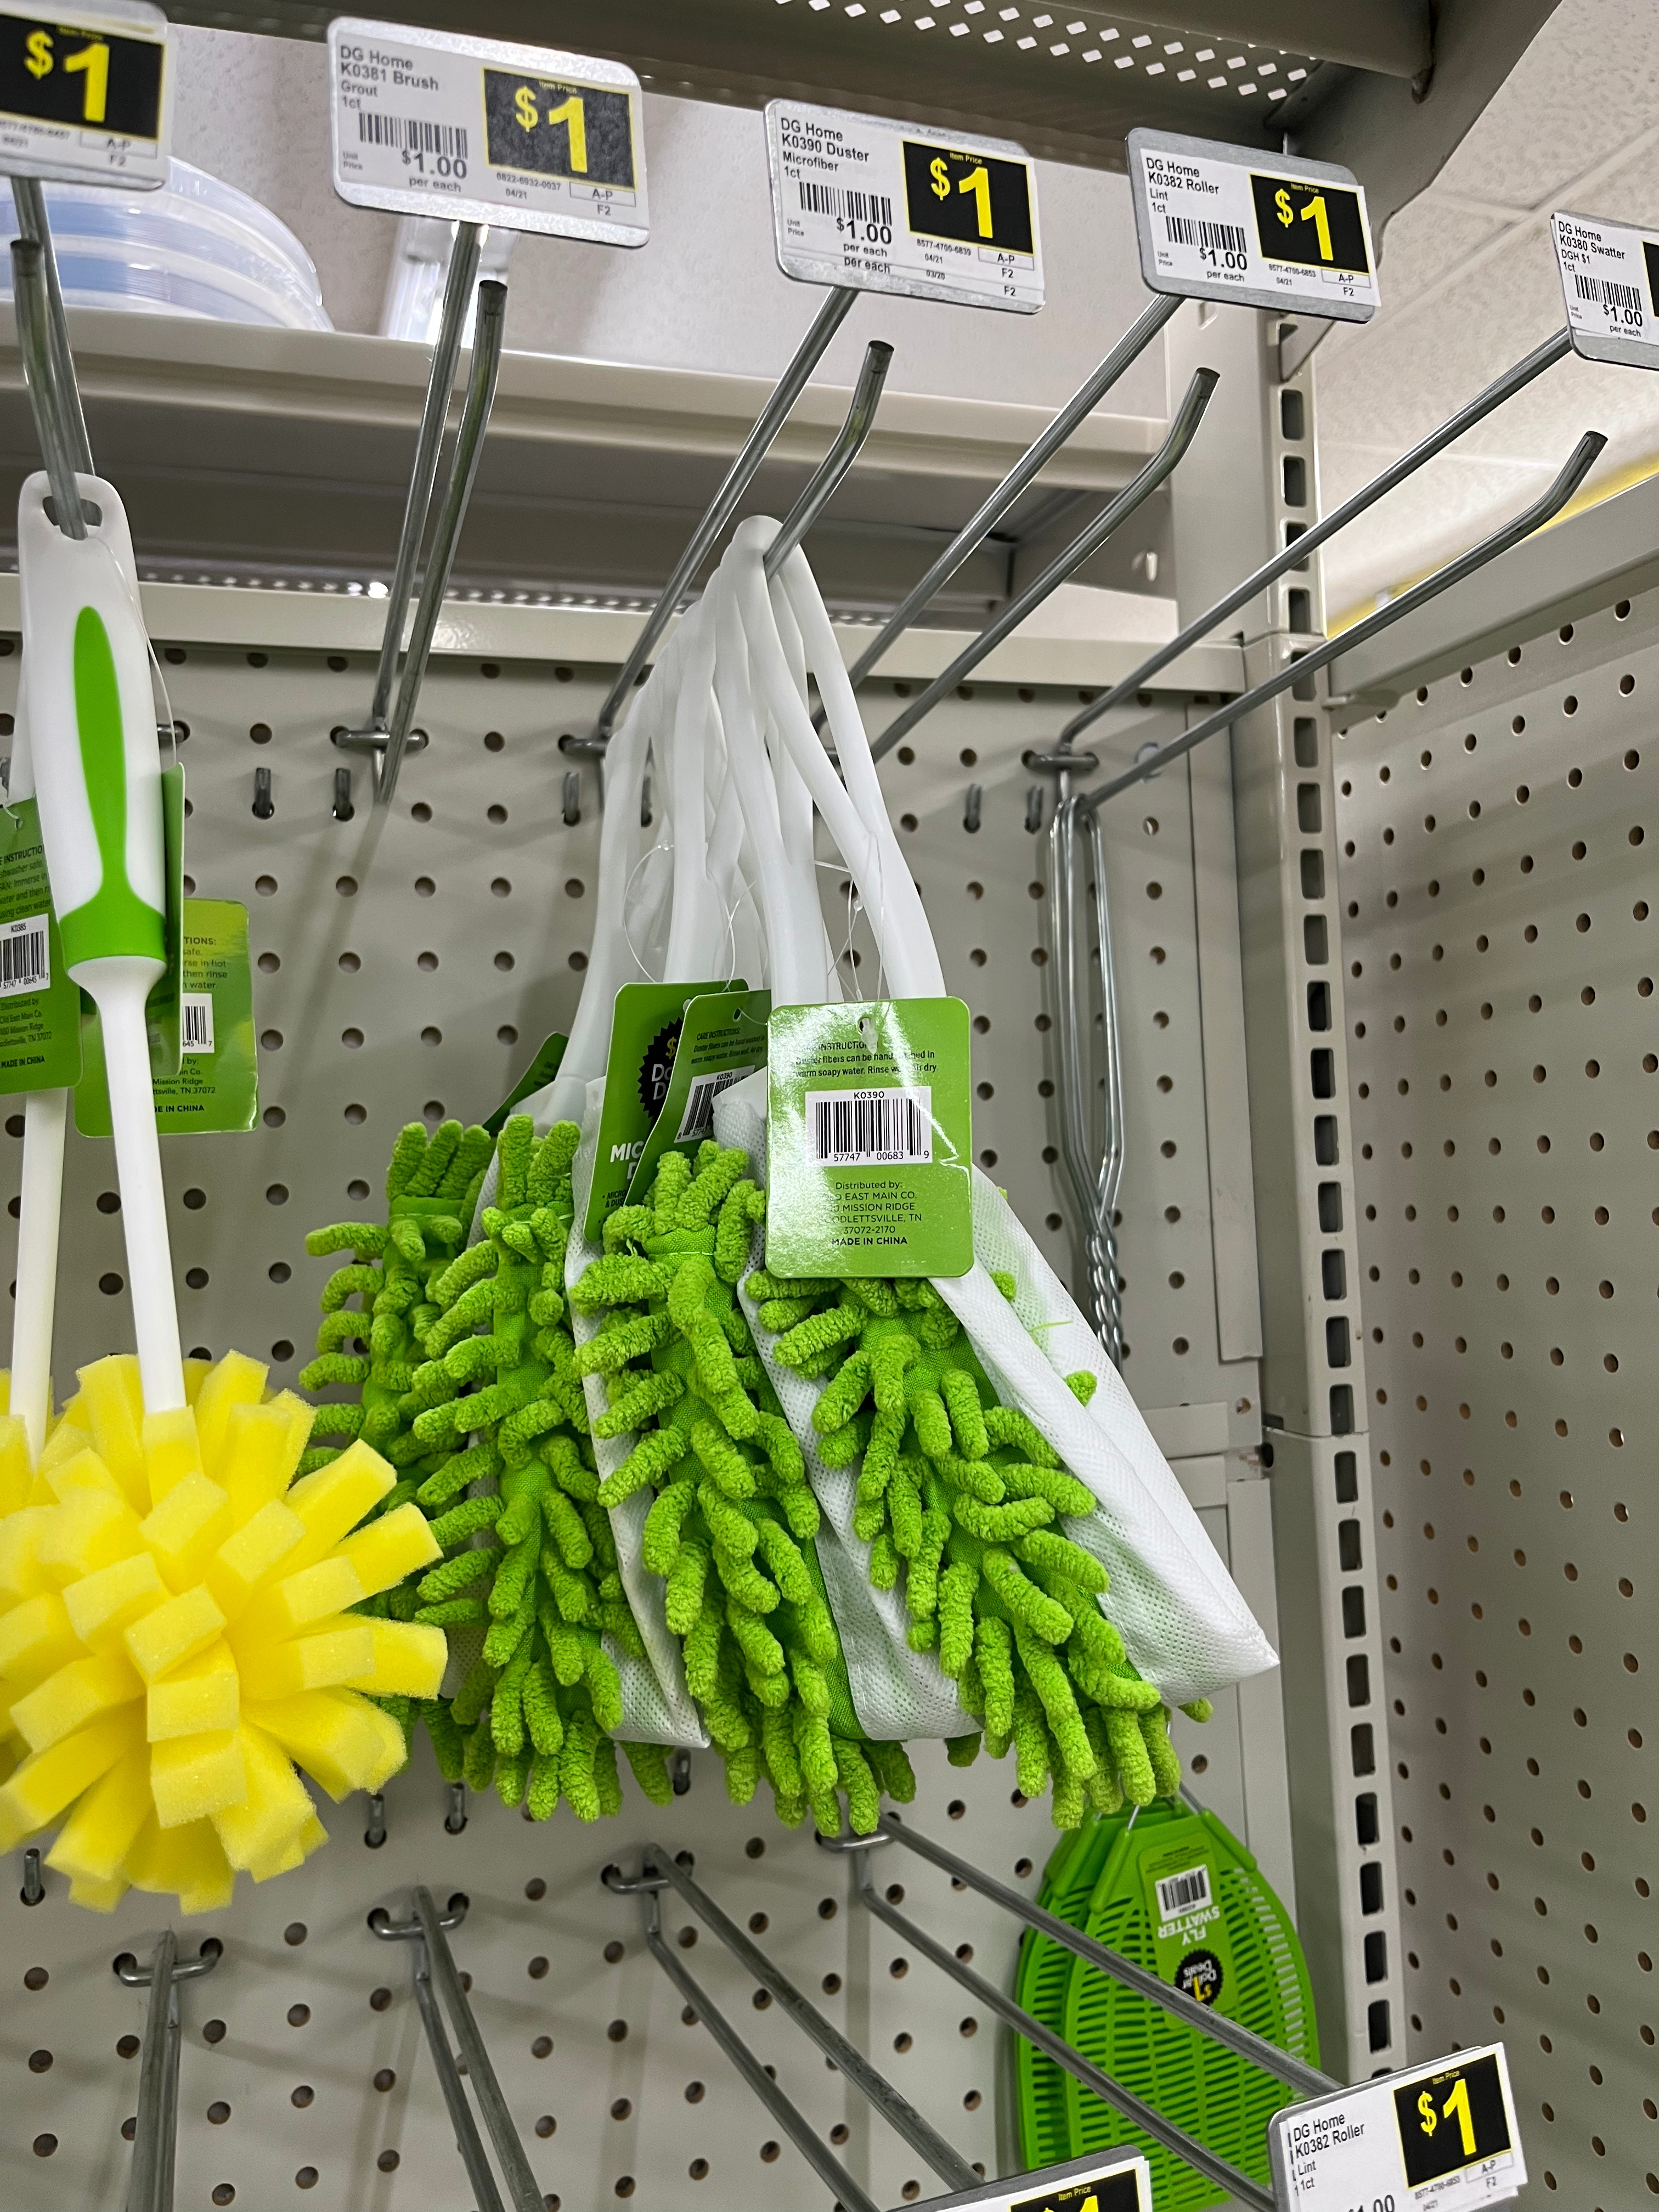 Dollar General Favorites: Better Deals Than Dollar Tree! – Come Home For  Comfort